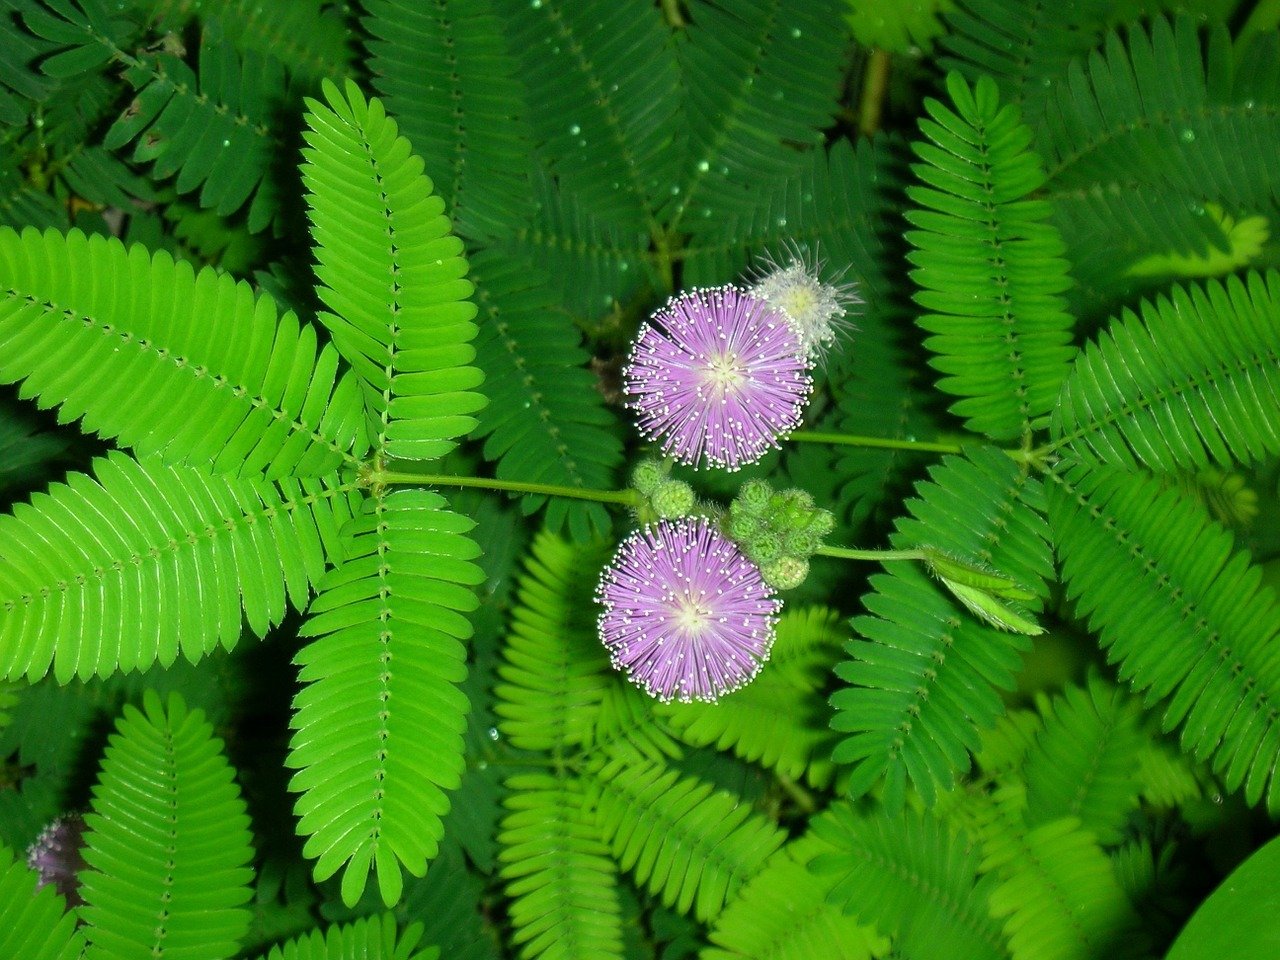 Mimosa leaves and flowers